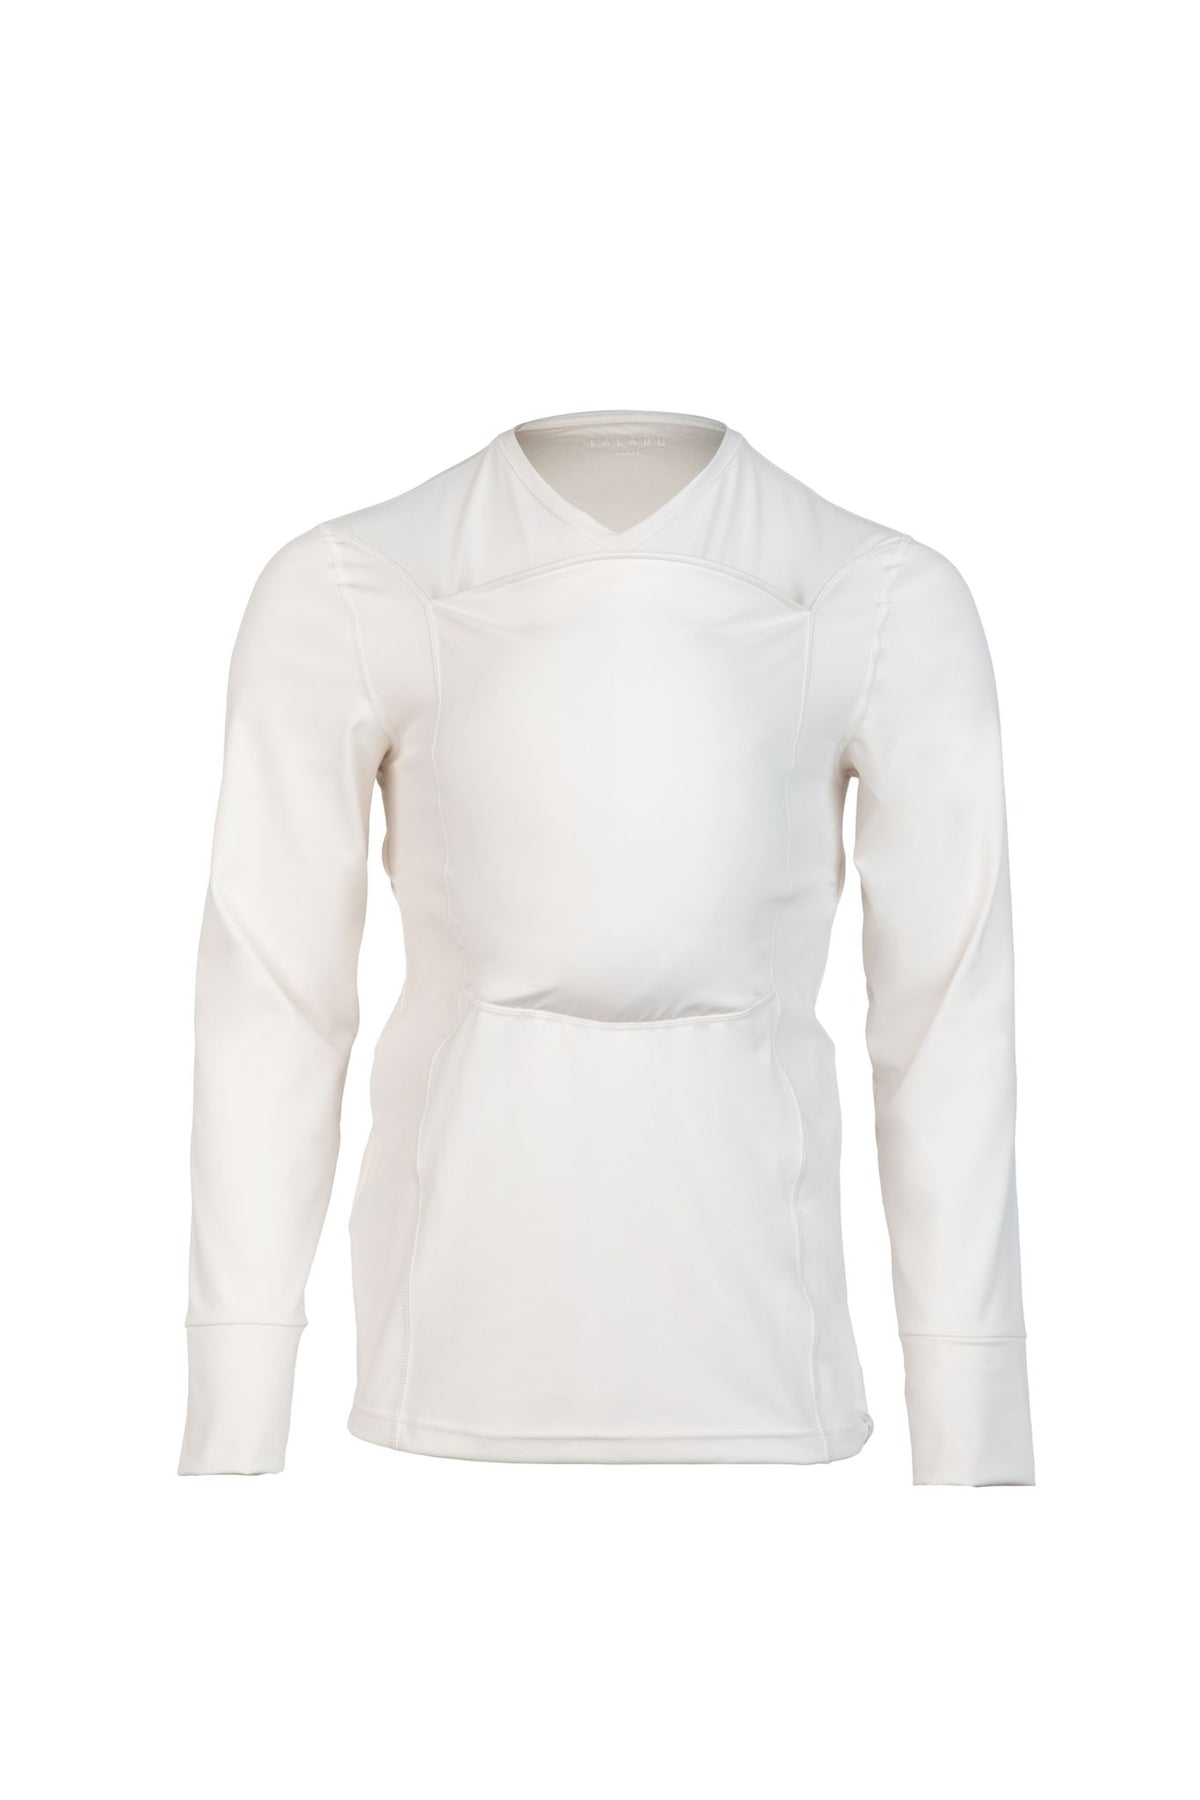 Long sleeve v-neck Dad Shirt with a front pouch for wearing a newborn in white color called Natural. Front view.